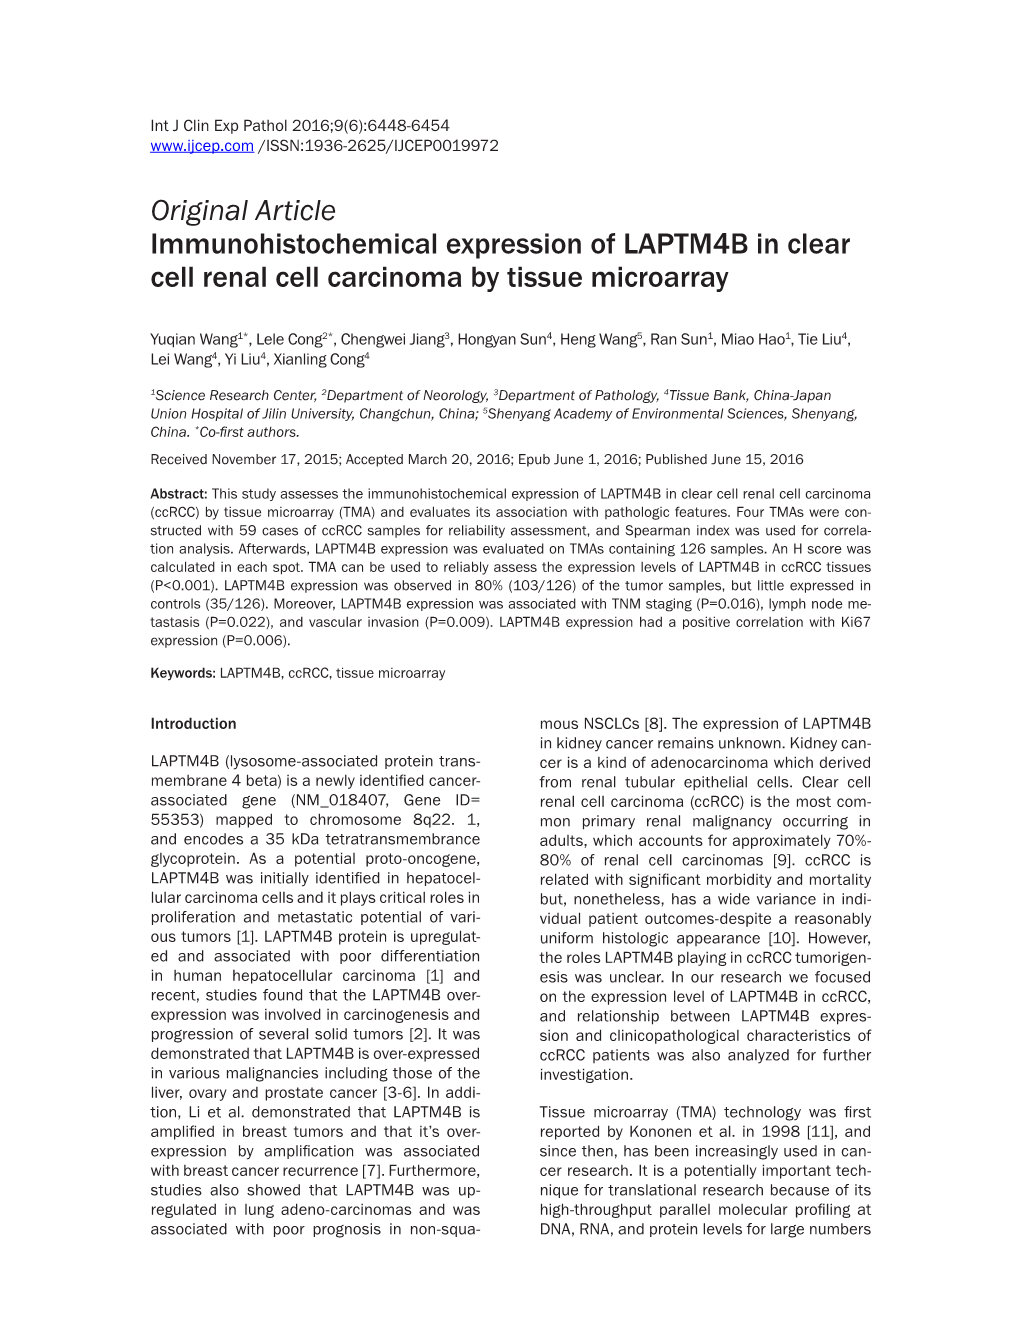 Original Article Immunohistochemical Expression of LAPTM4B in Clear Cell Renal Cell Carcinoma by Tissue Microarray